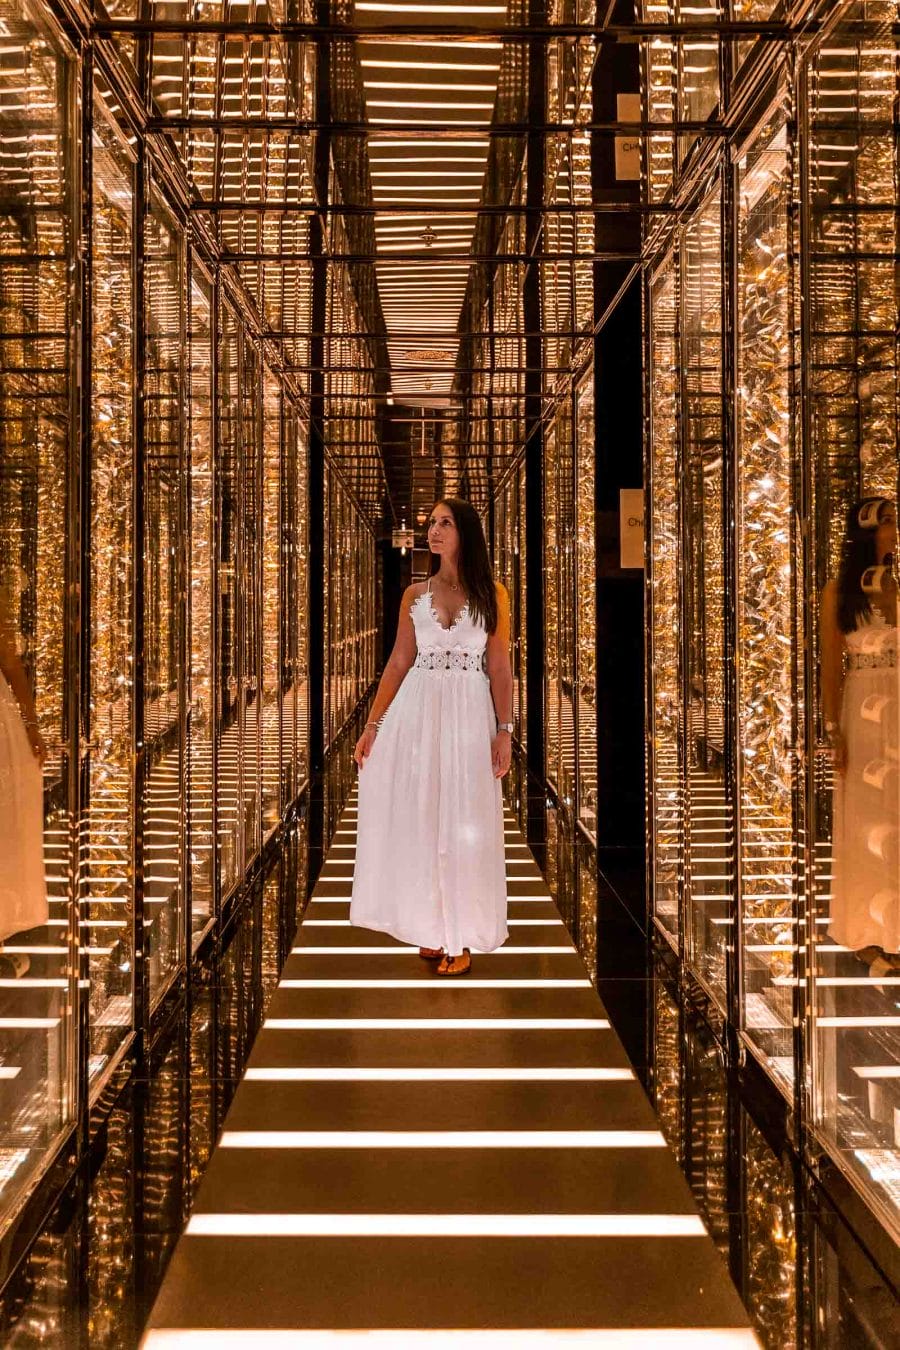 Girl in white dress standing in the middle of a golden corridor